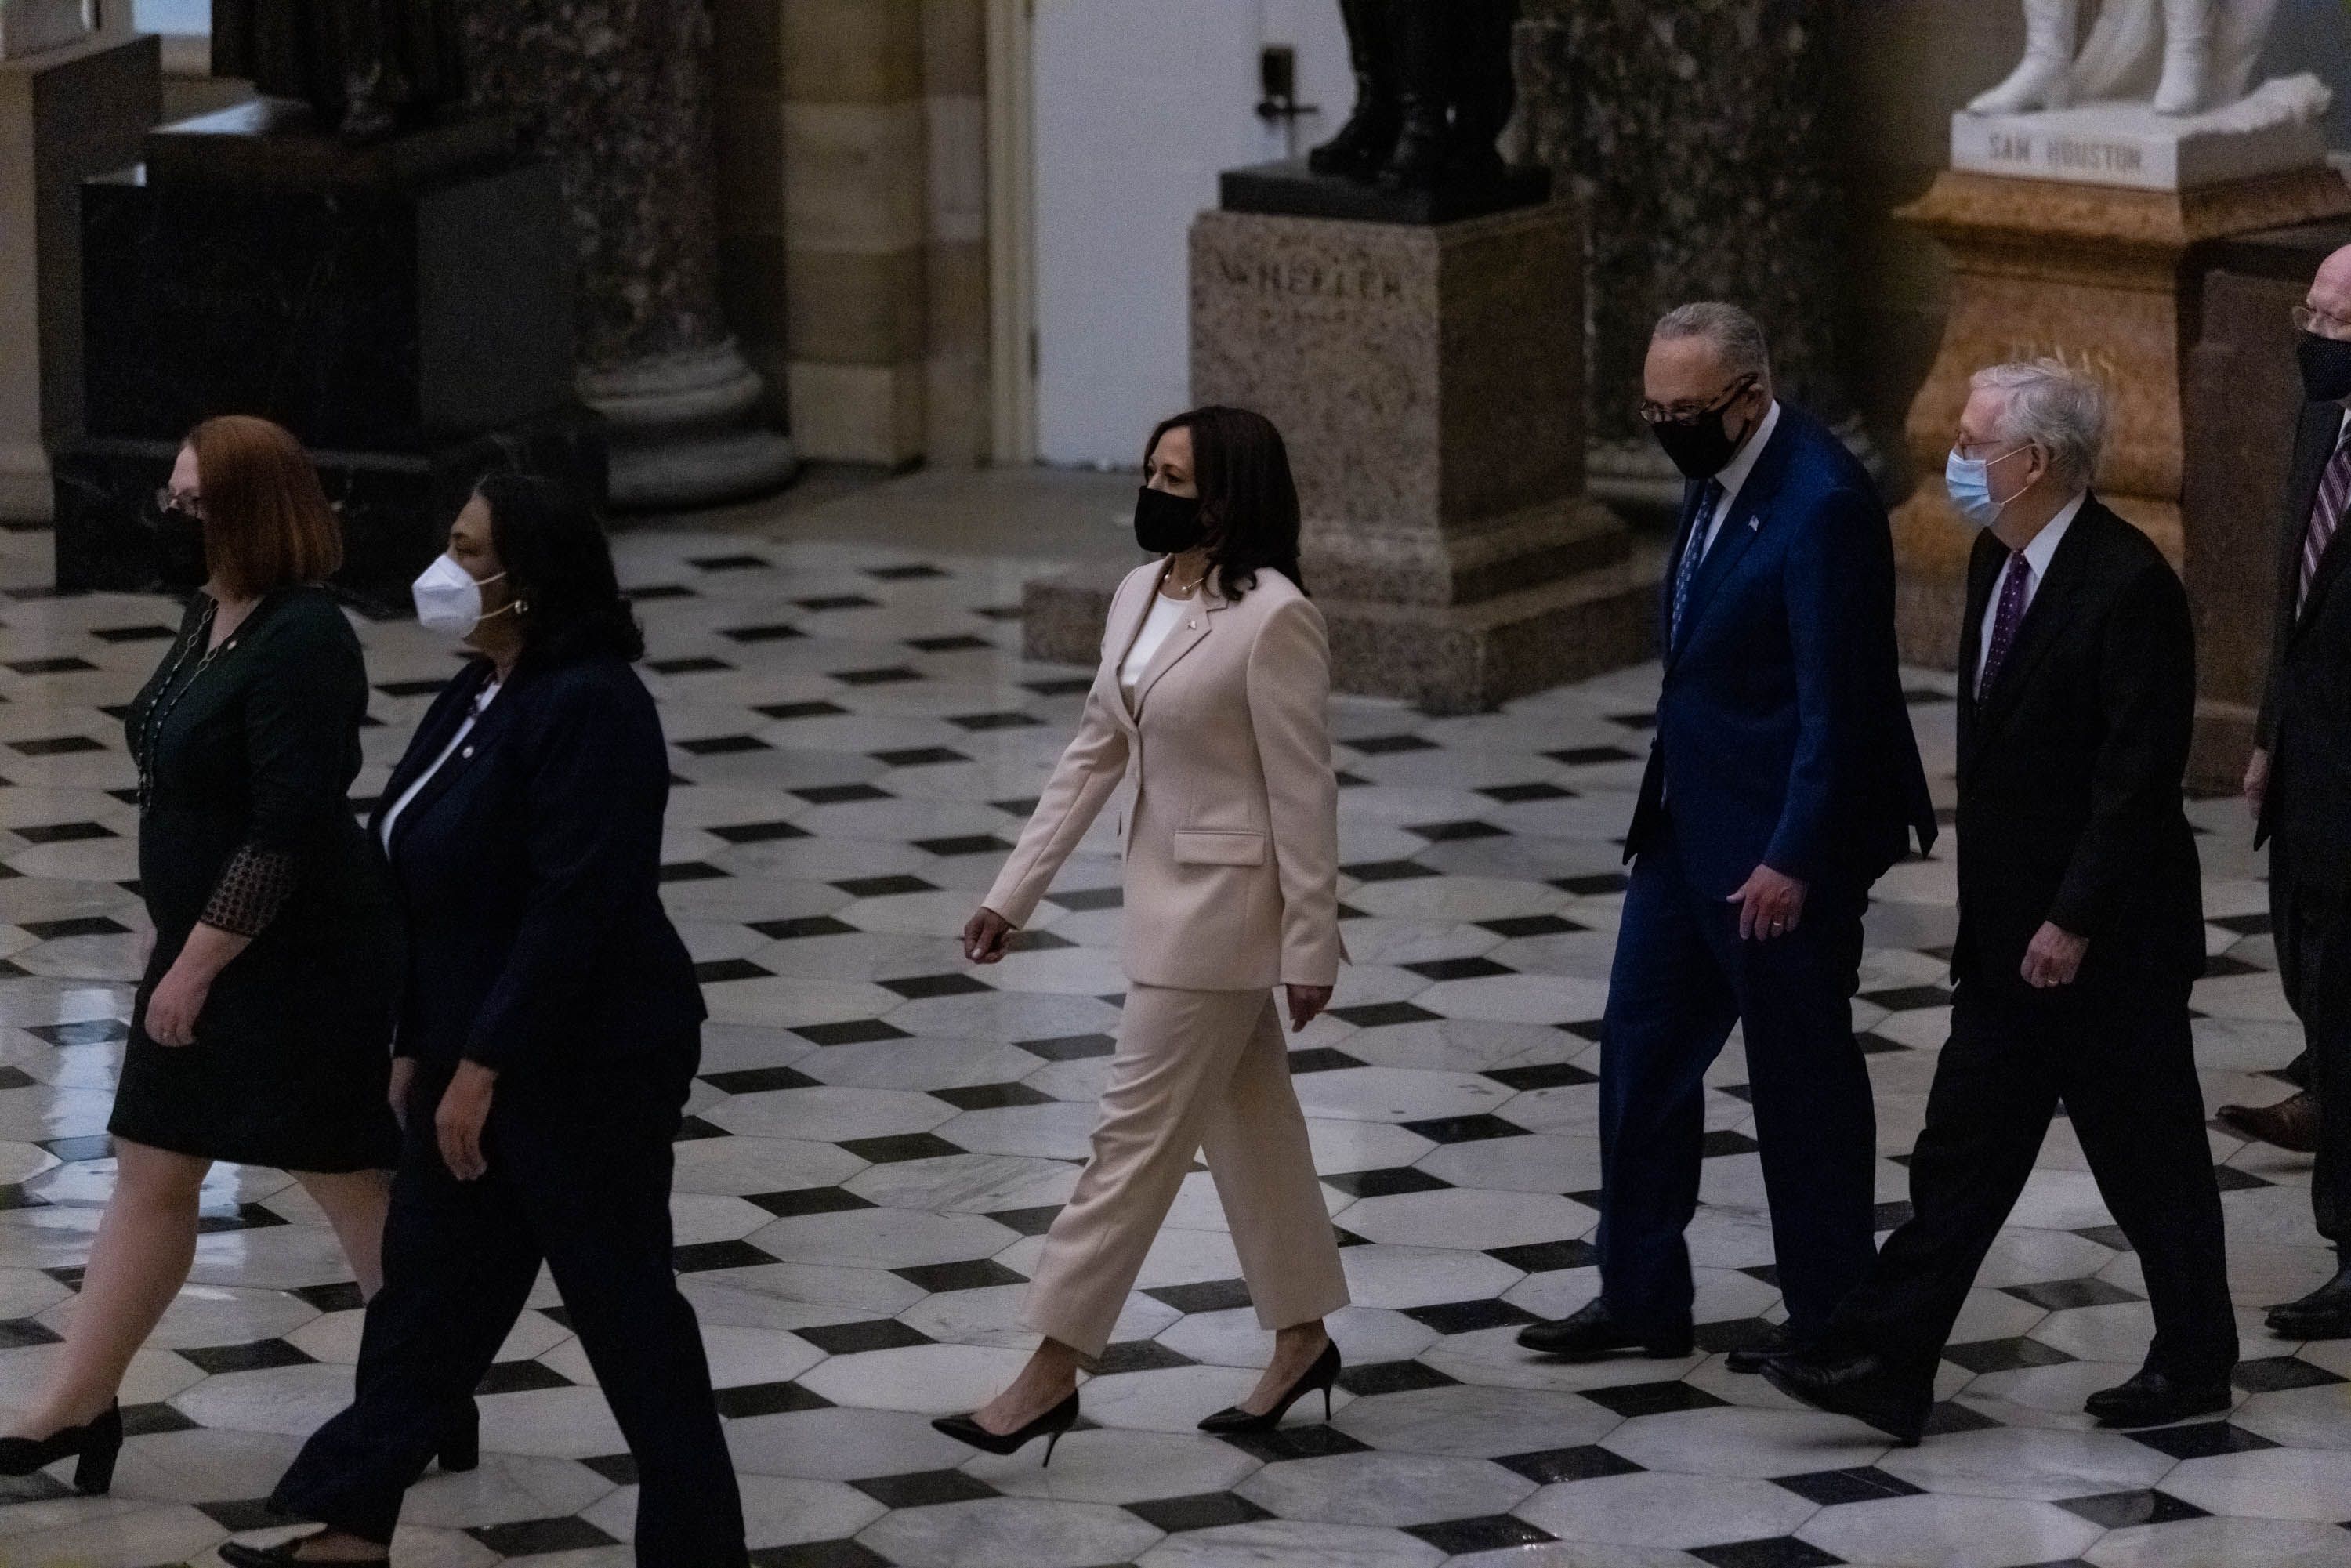 Vice President Kamala Harris leads Senate Majority Leader Chuck Schumer (D-NY) and Minority Leader Mitch McConnell (R-KY) walk through Statuary Hall in the U.S. Capitol April 28